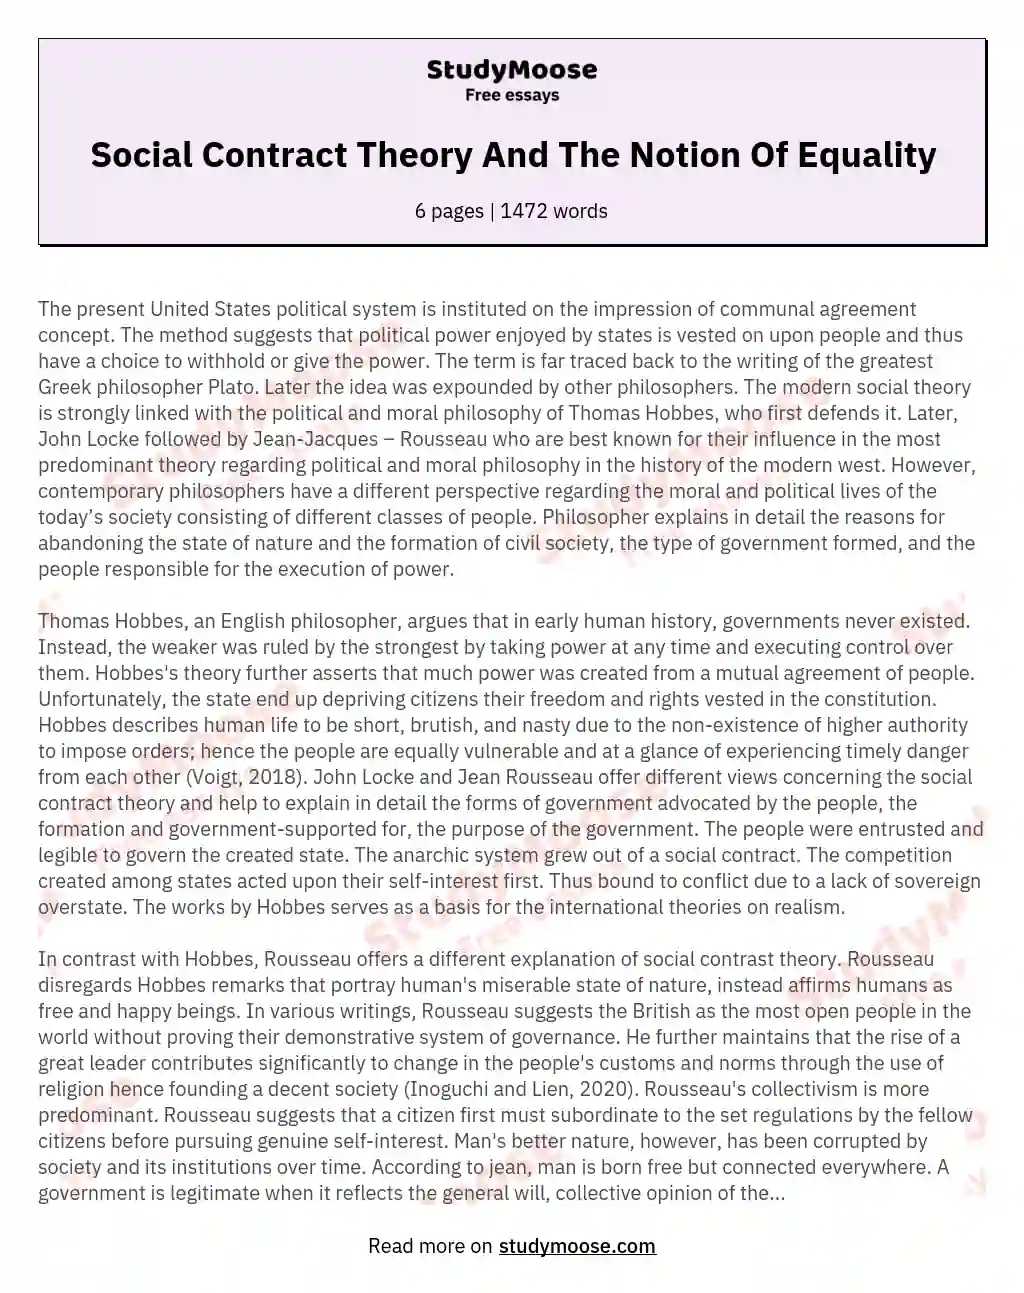 Social Contract Theory And The Notion Of Equality essay